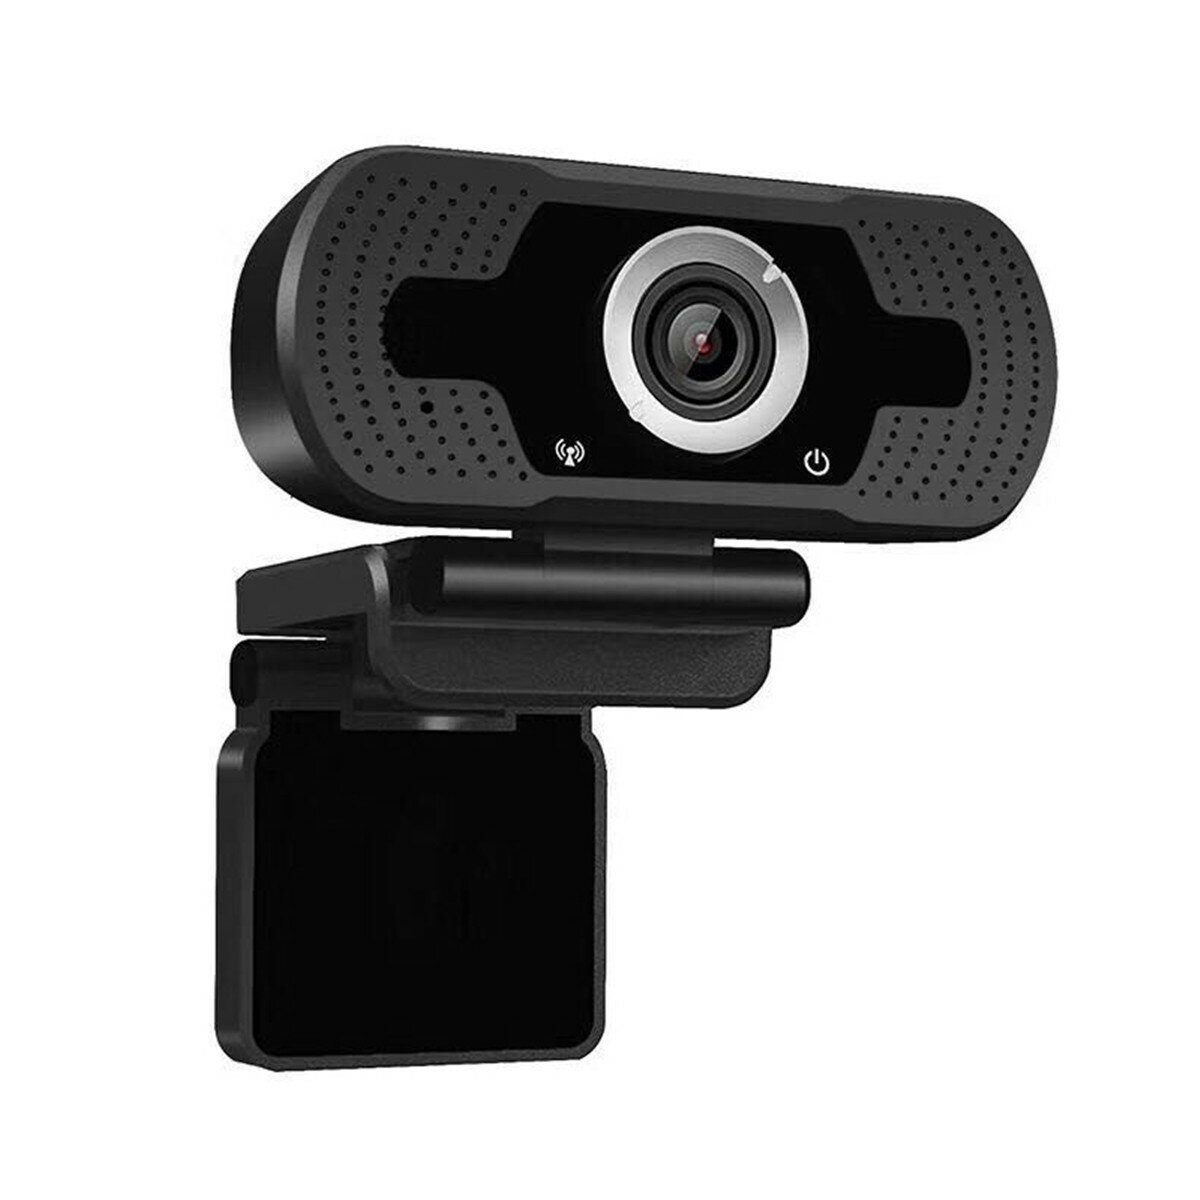 U4-N HD 1080P 110° Wide Angle Auto focus USB Webcam Conference Live Computer Camera Built-in Noise Reduction Microphone for PC Laptop COD